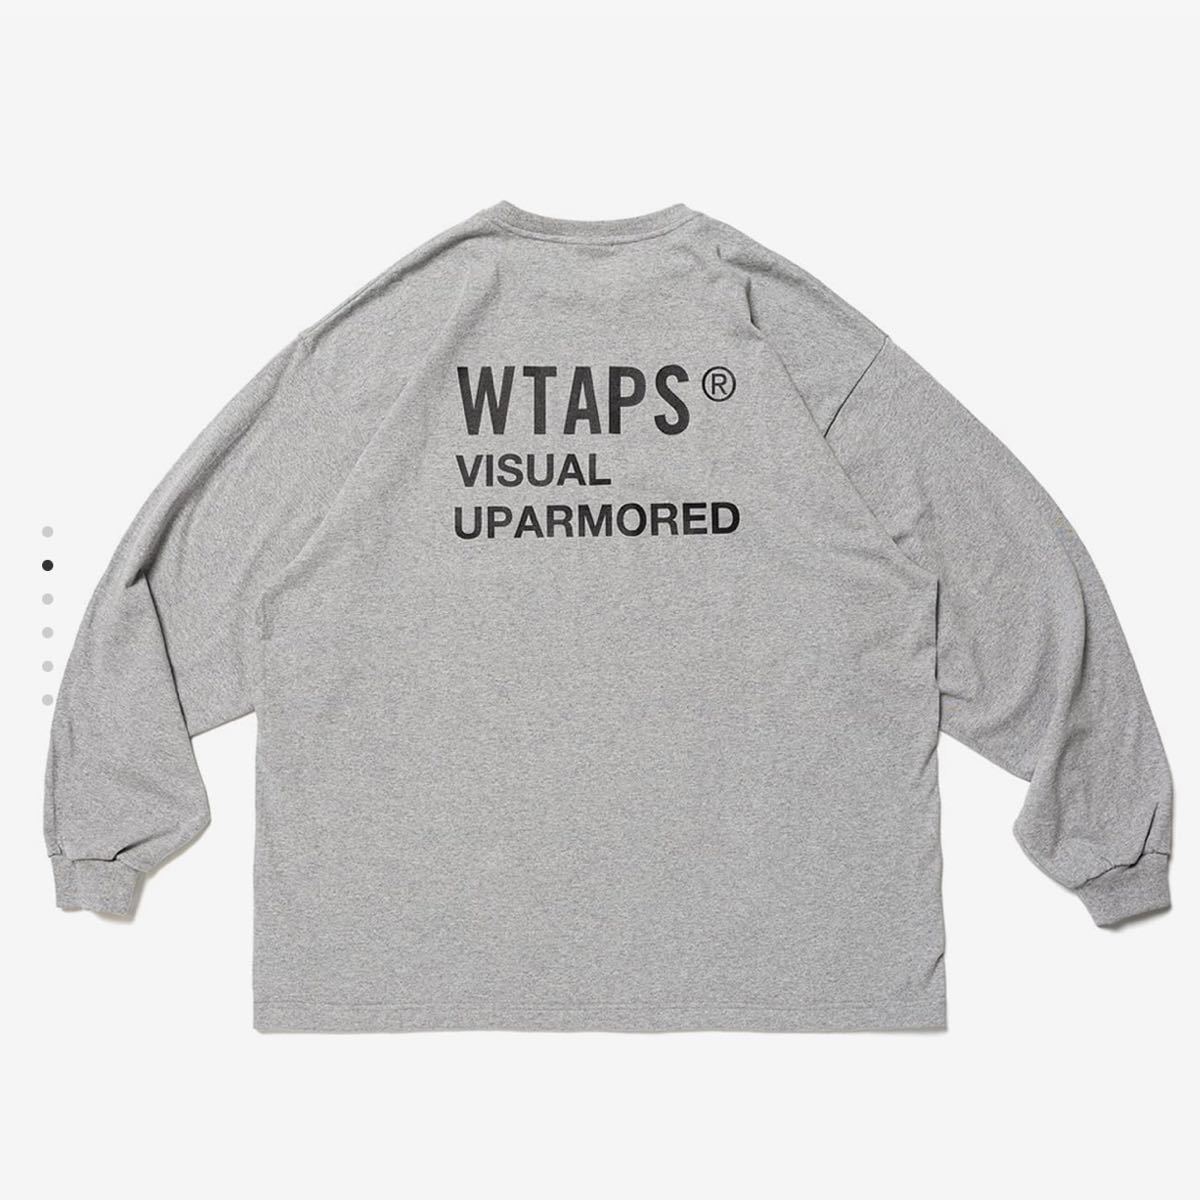 WTAPS VISUAL UPARMORED LS COTTON WHT XL 3